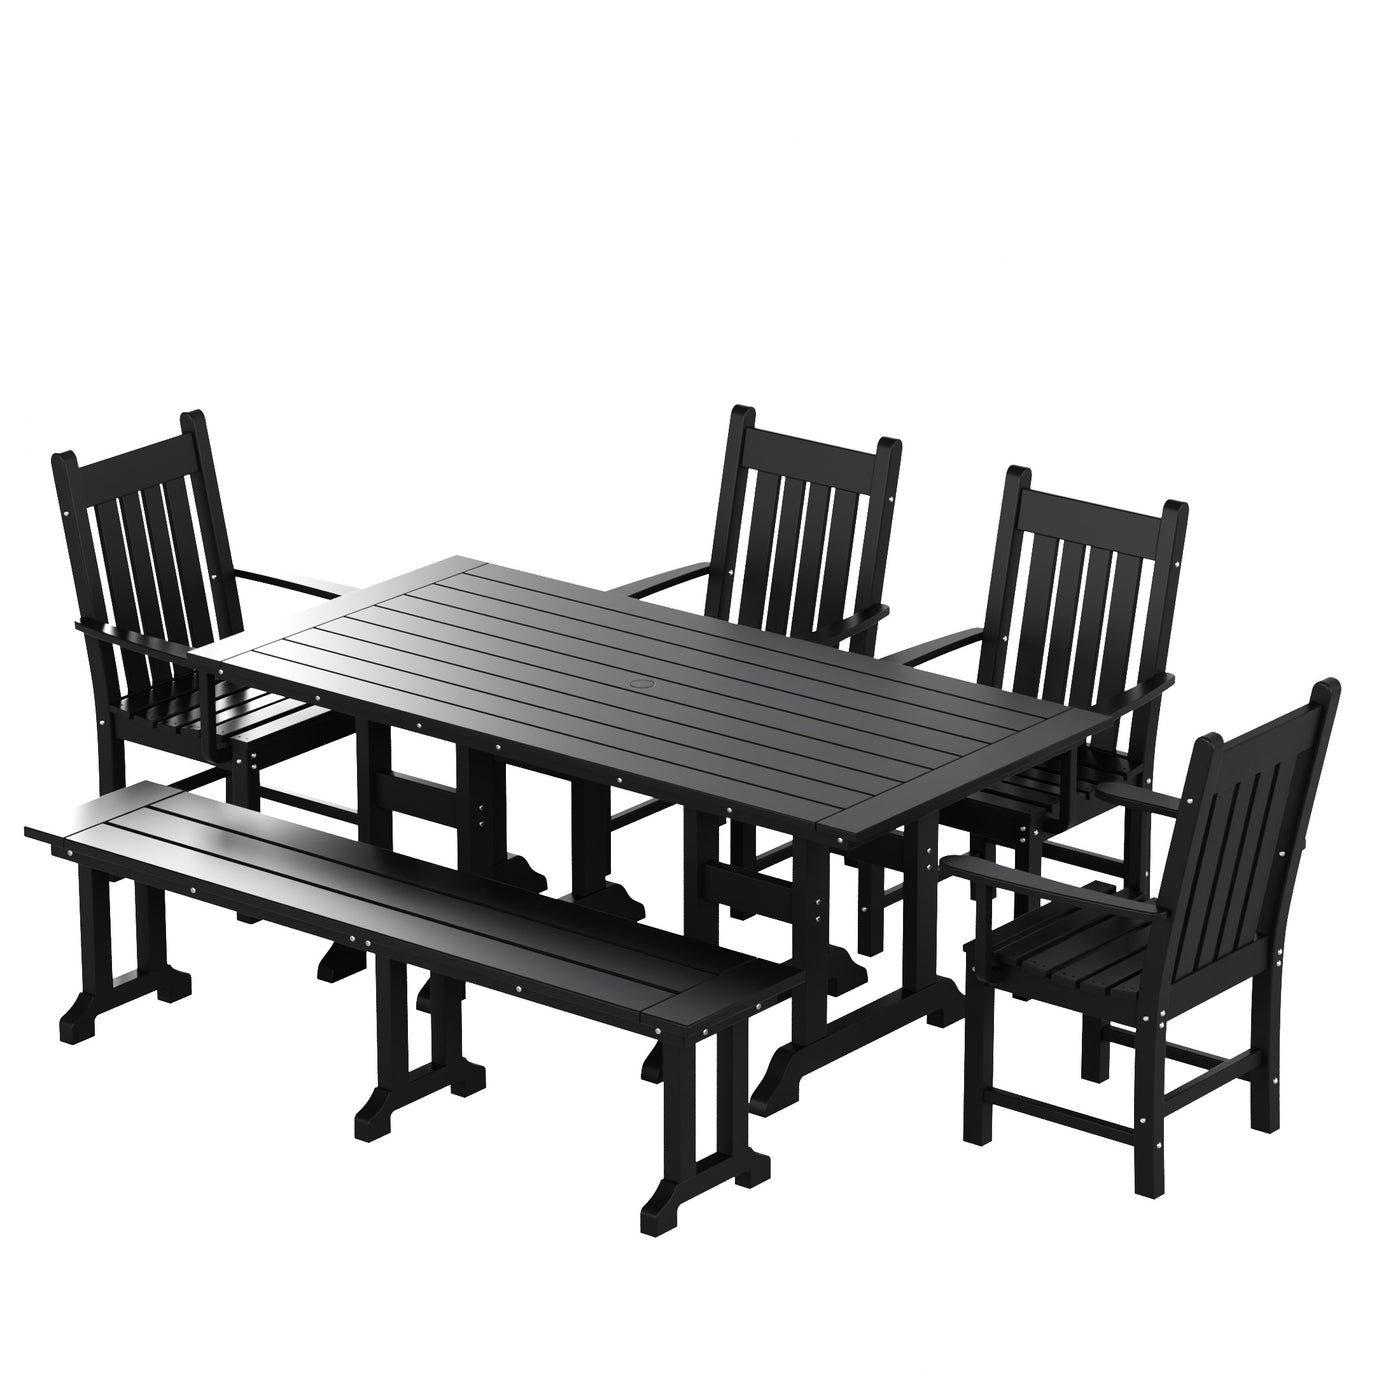 Malibu 6 Piece Outdoor Patio Dining Set Outdoor Table and Armchair Bench